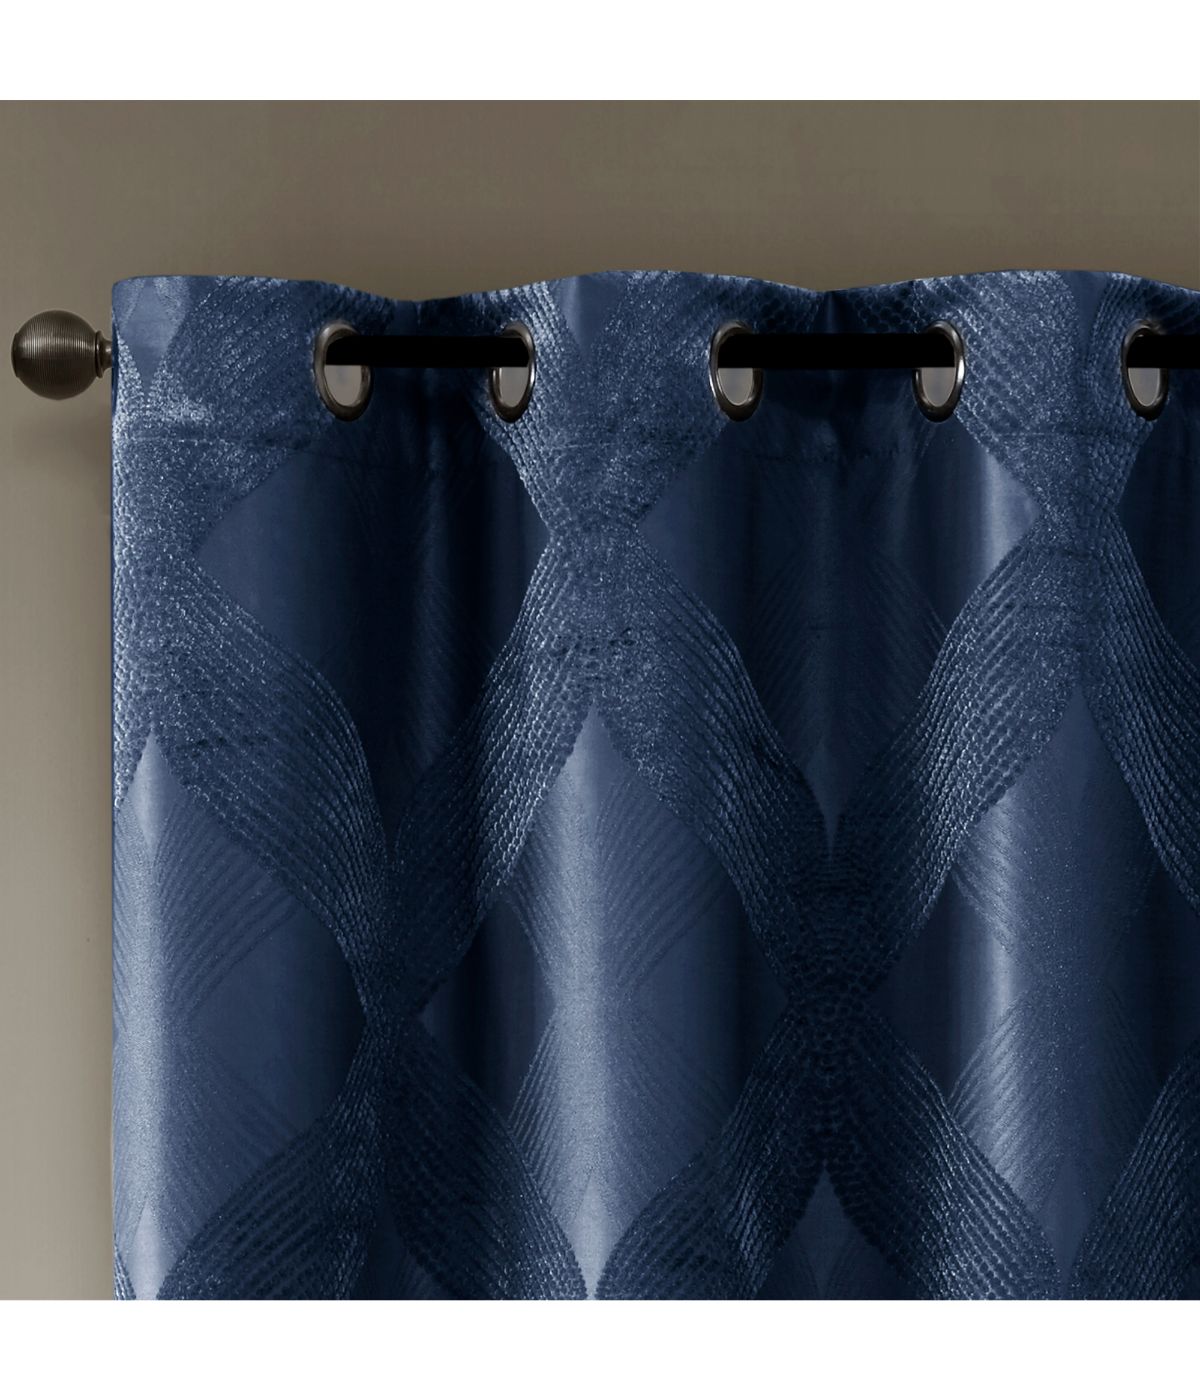 Byron Ogee Knitted Jacquard Total Blackout Curtain Panel Navy